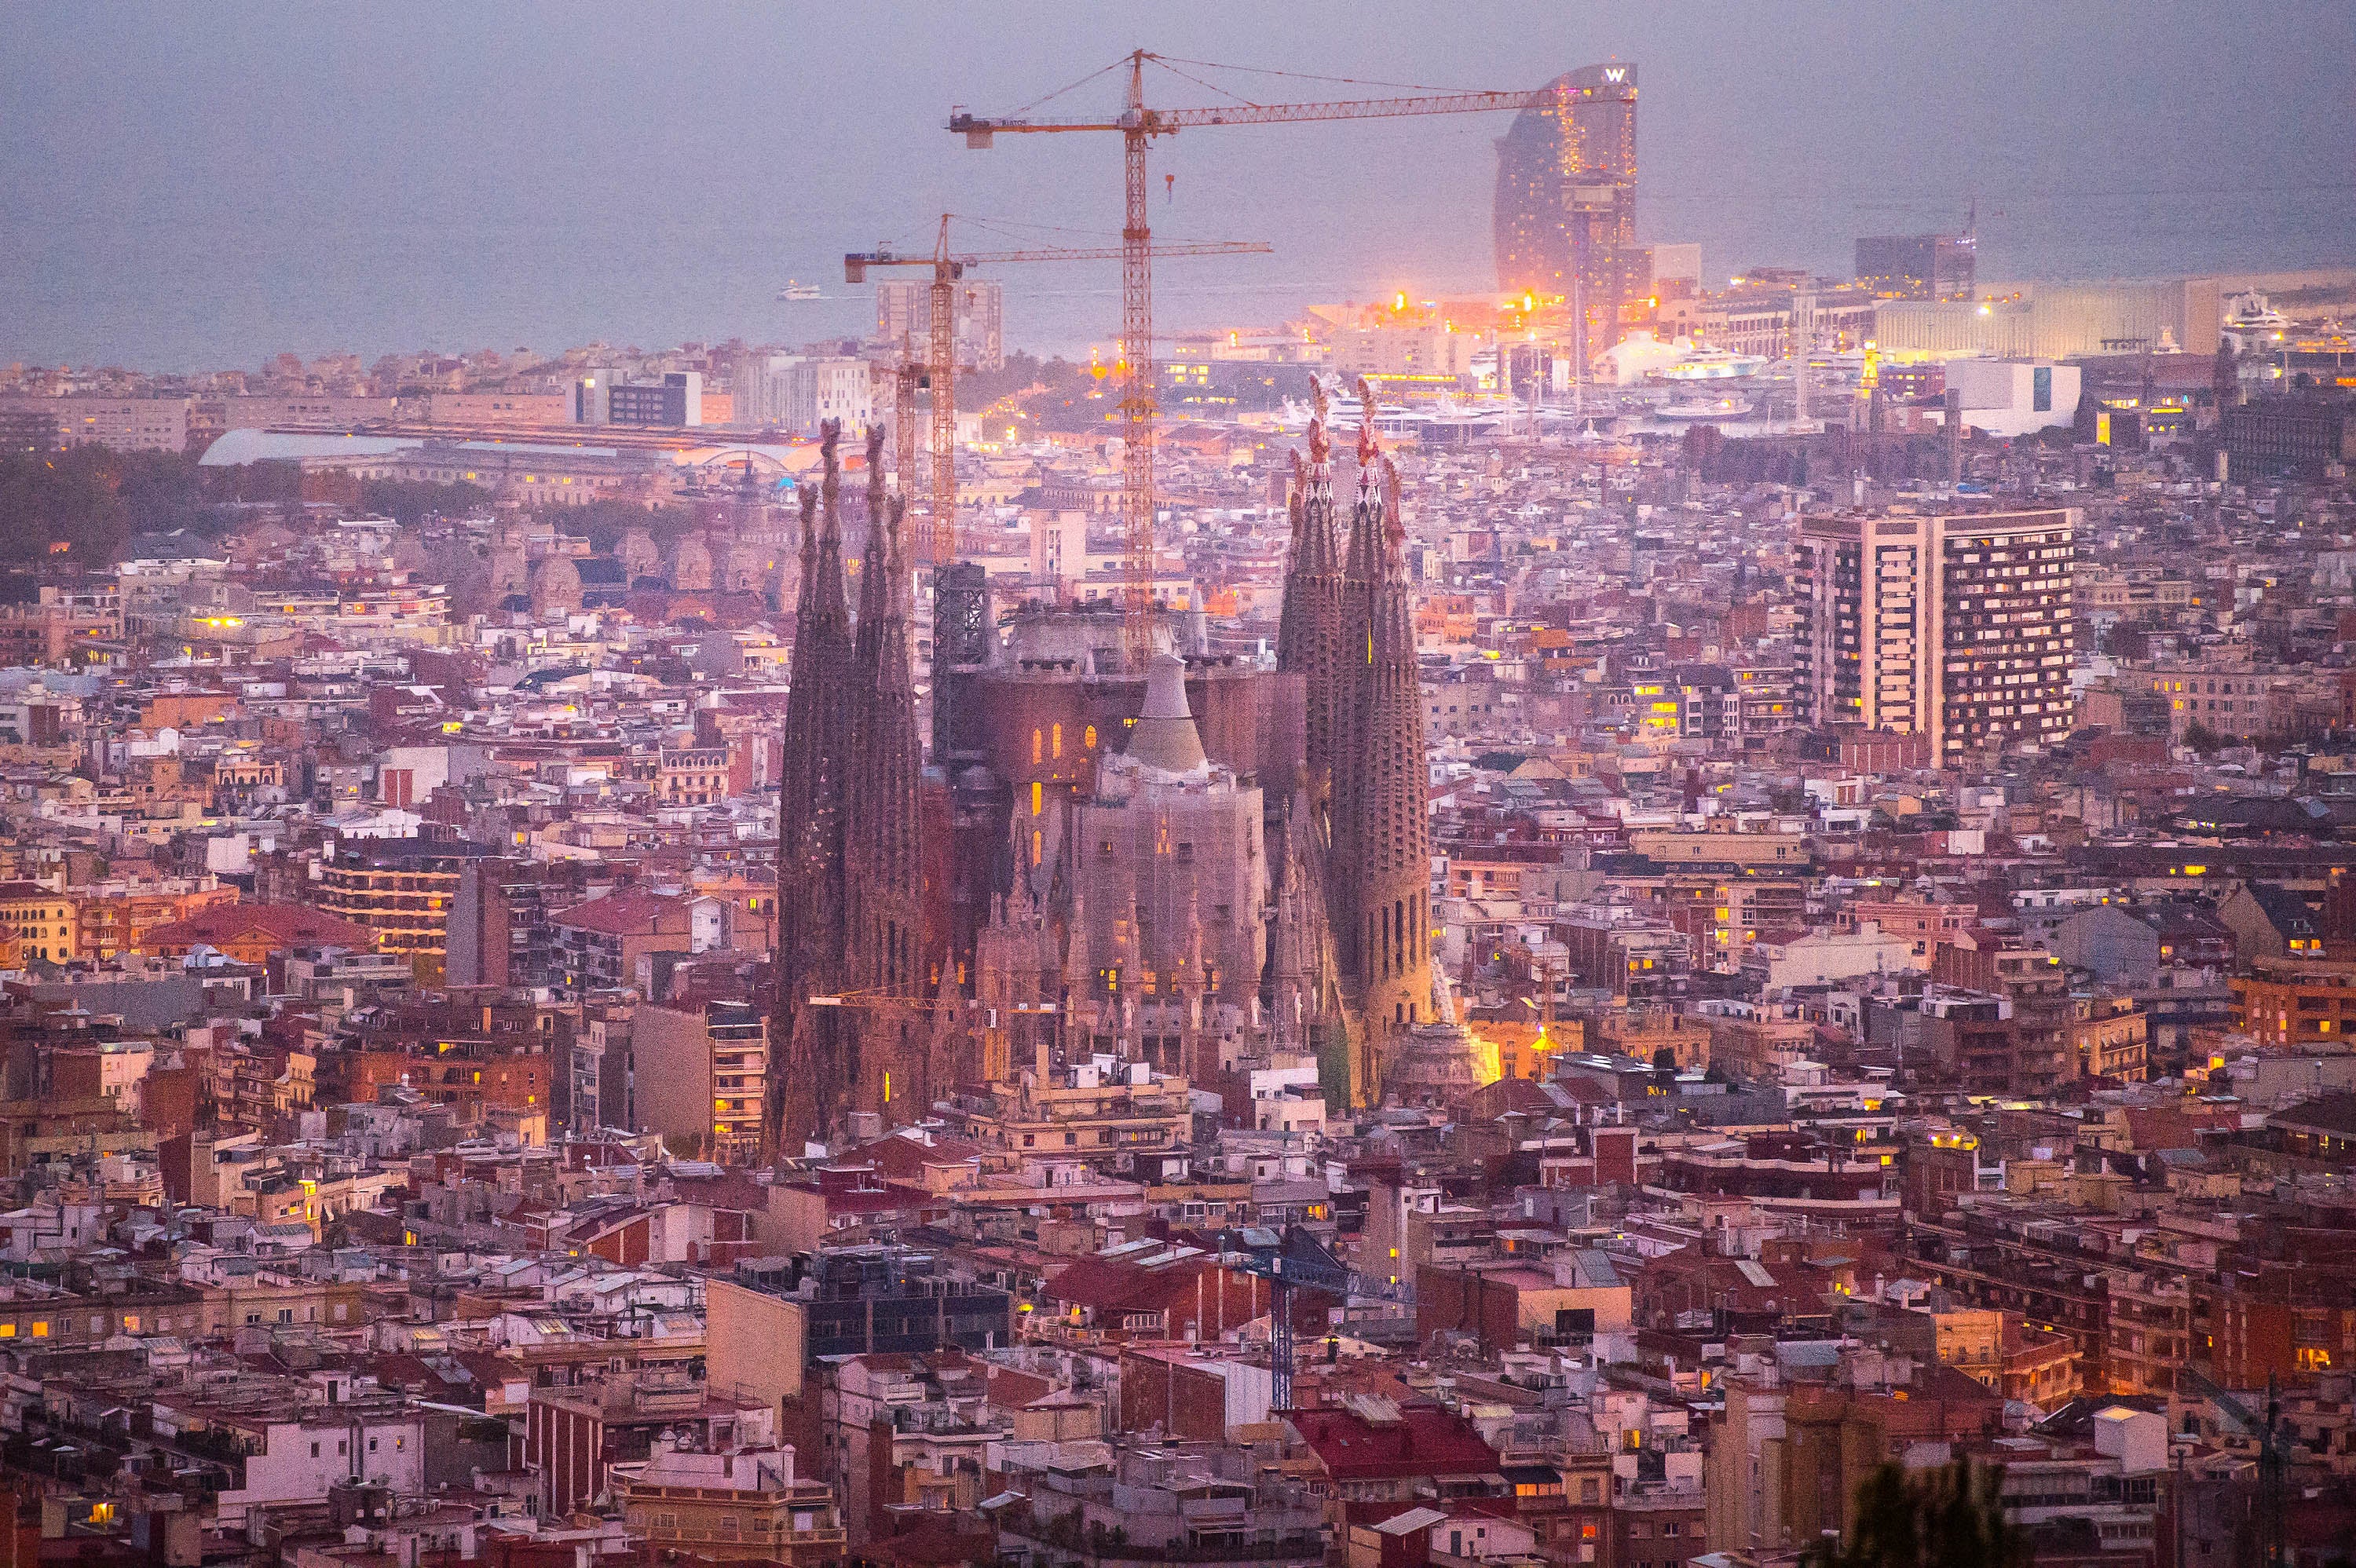 This is not the first time Barcelona’s famous cathedral has faced challenges in construction